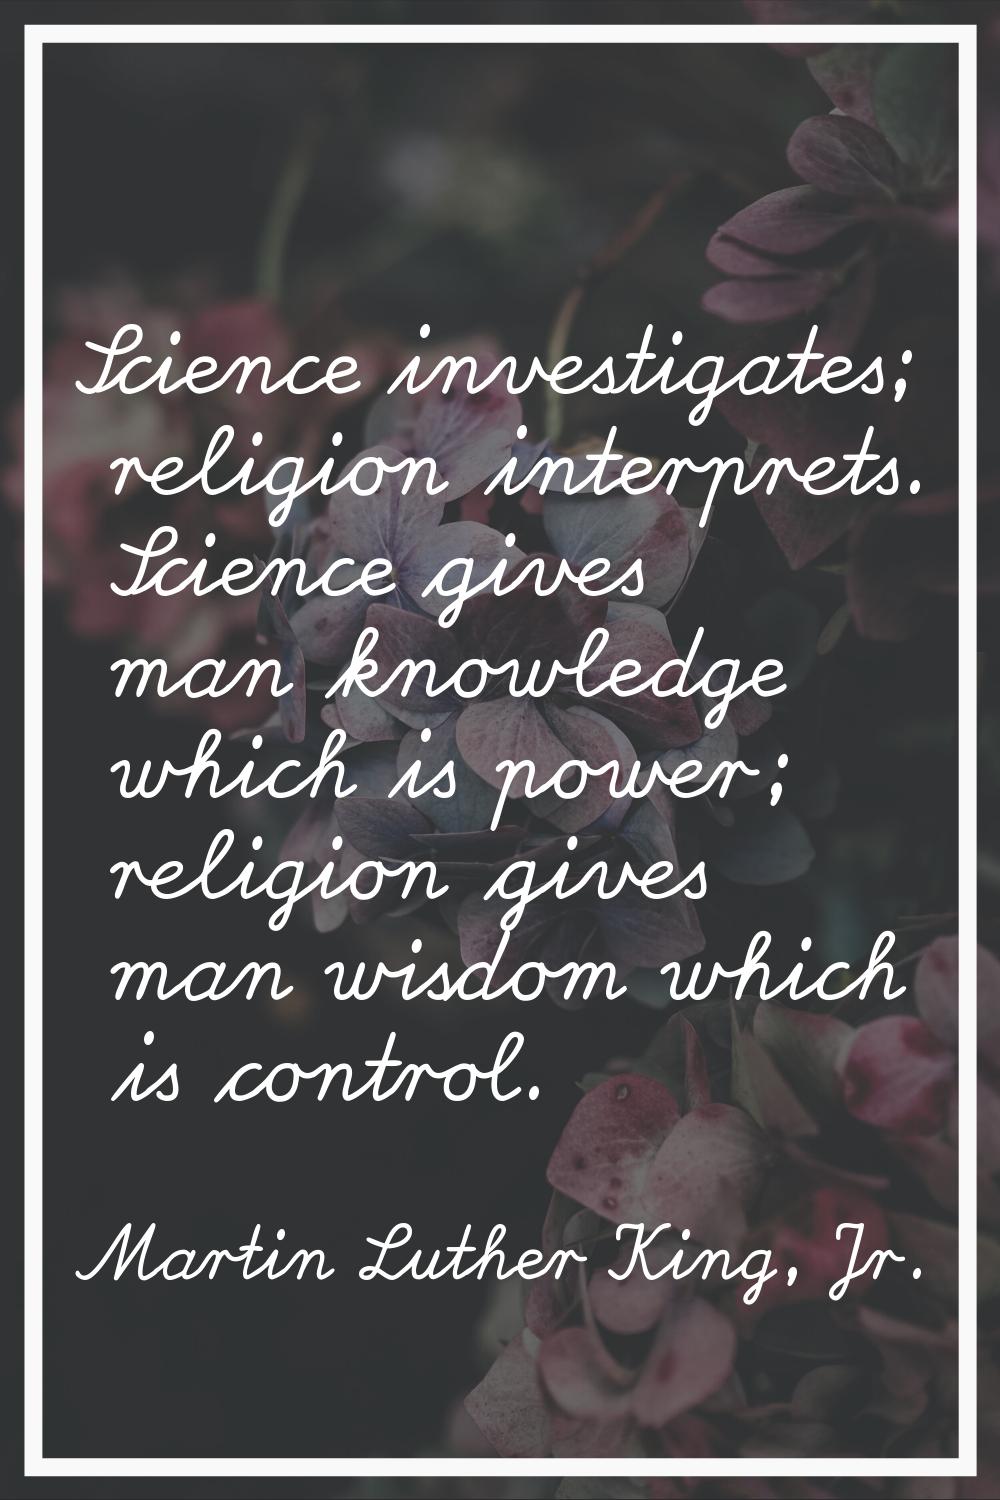 Science investigates; religion interprets. Science gives man knowledge which is power; religion giv